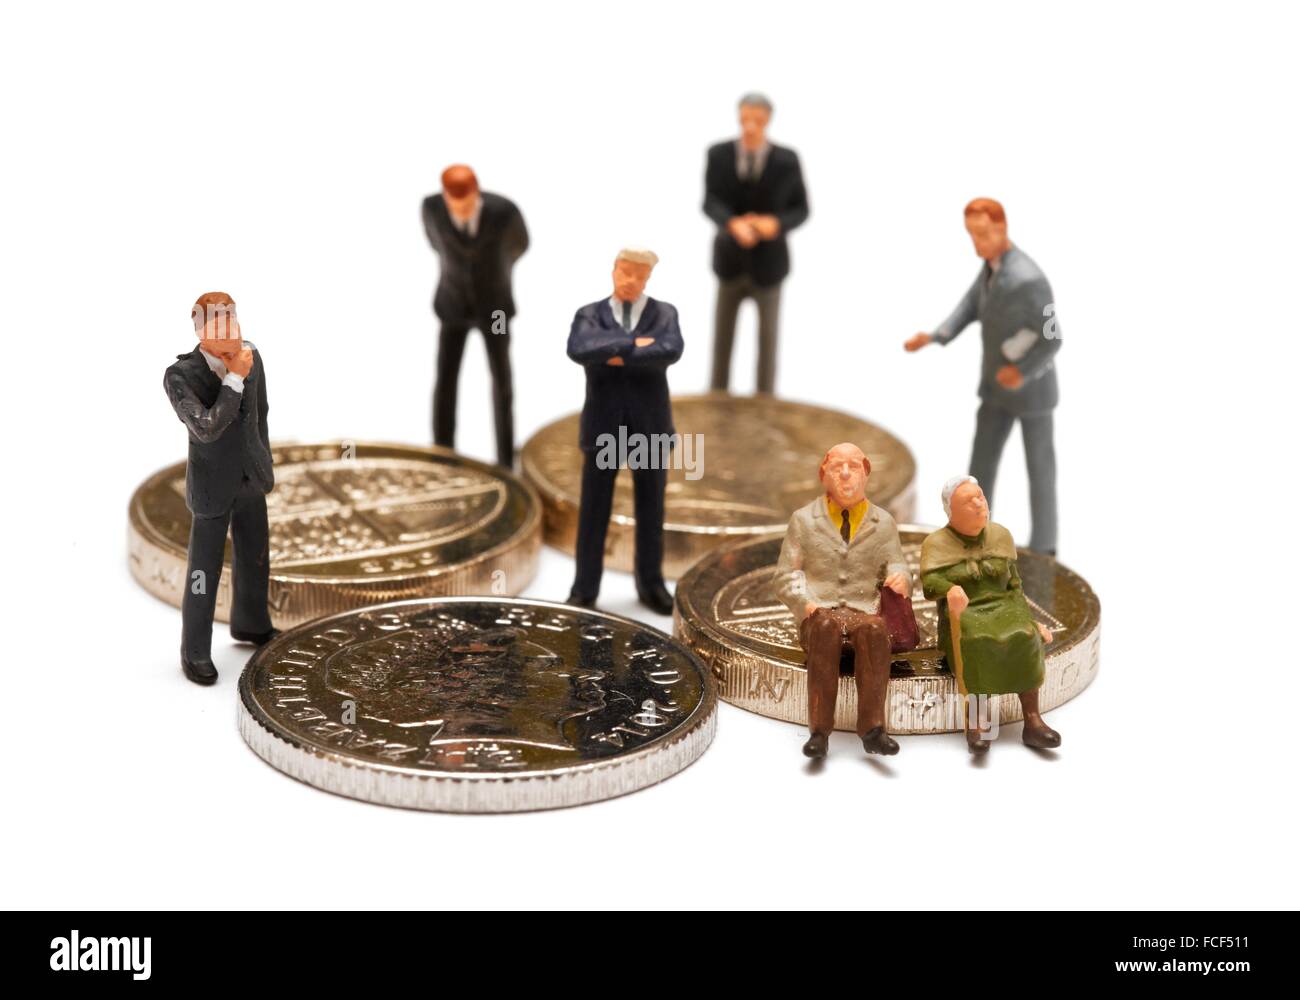 A Miniature pensioner couple sitting on british coins surrounded by financial advisor's in suits concept. Stock Photo